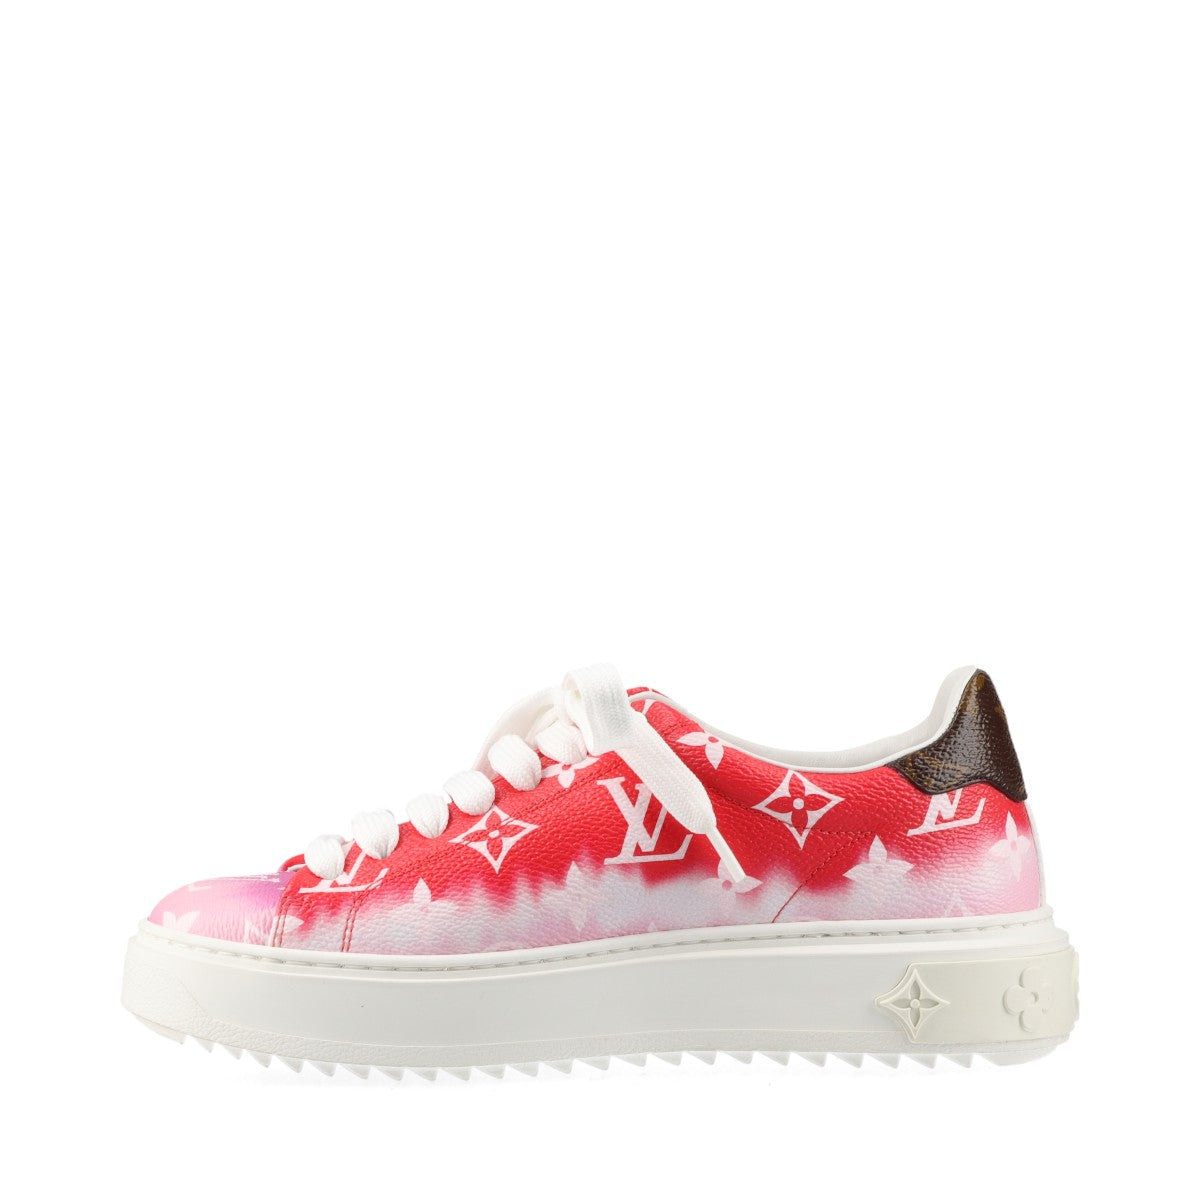 Louis Vuitton Timeout line 19-year PVC & leather Sneakers 35 Ladies' Red x white CL1119 Monogram